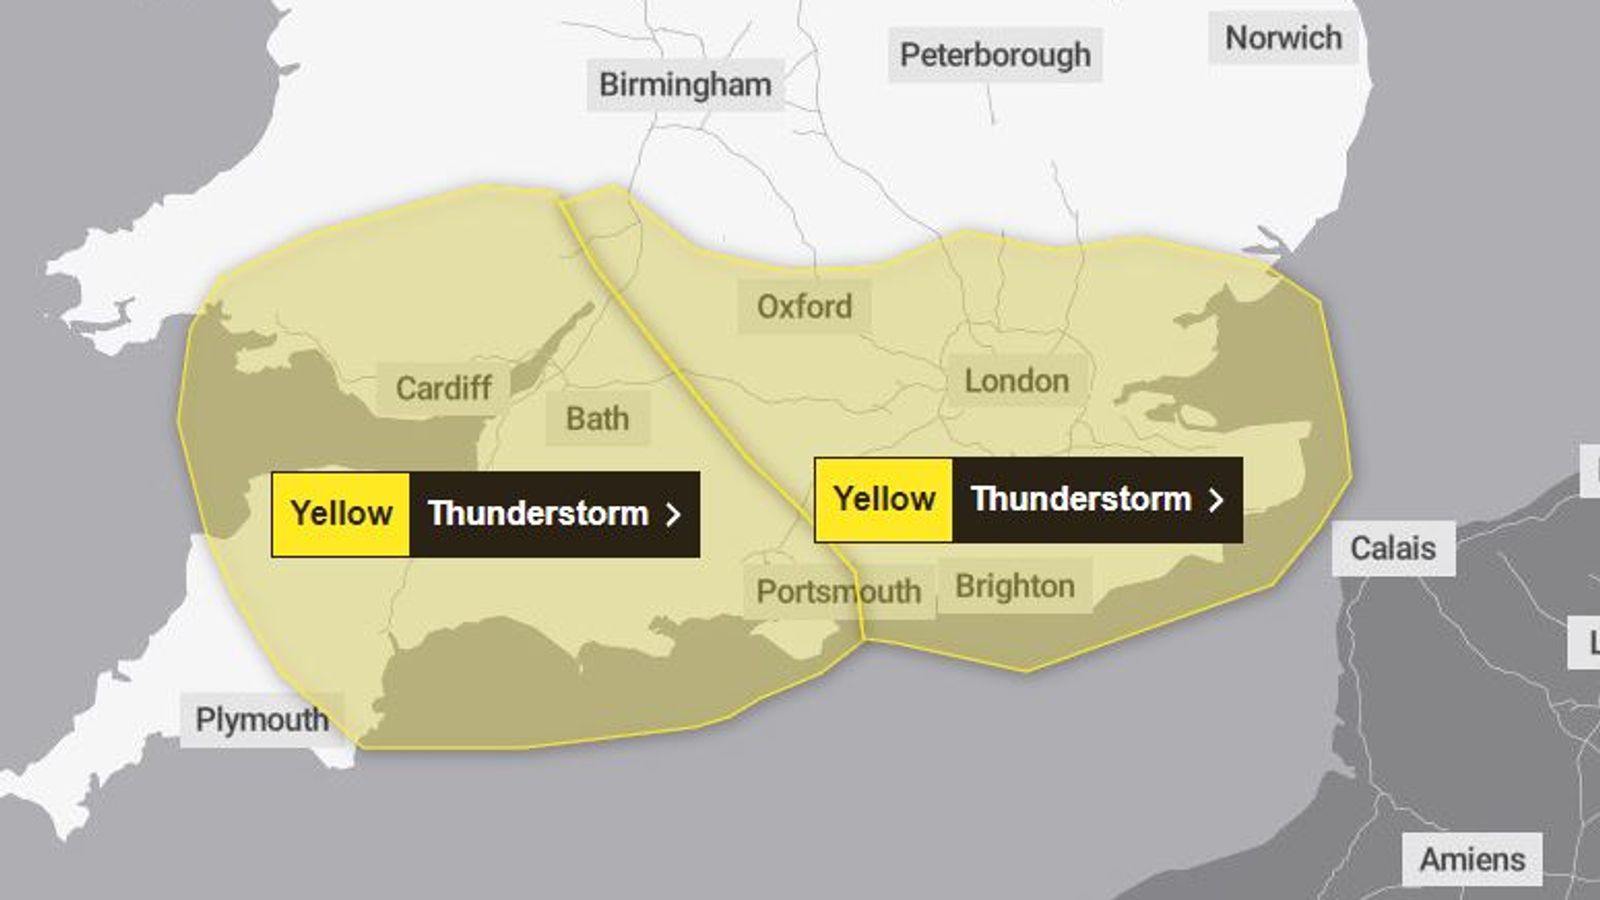 UK weather: Met Office warning extended after UK hit by thunderstorms and heavy rain | UK News